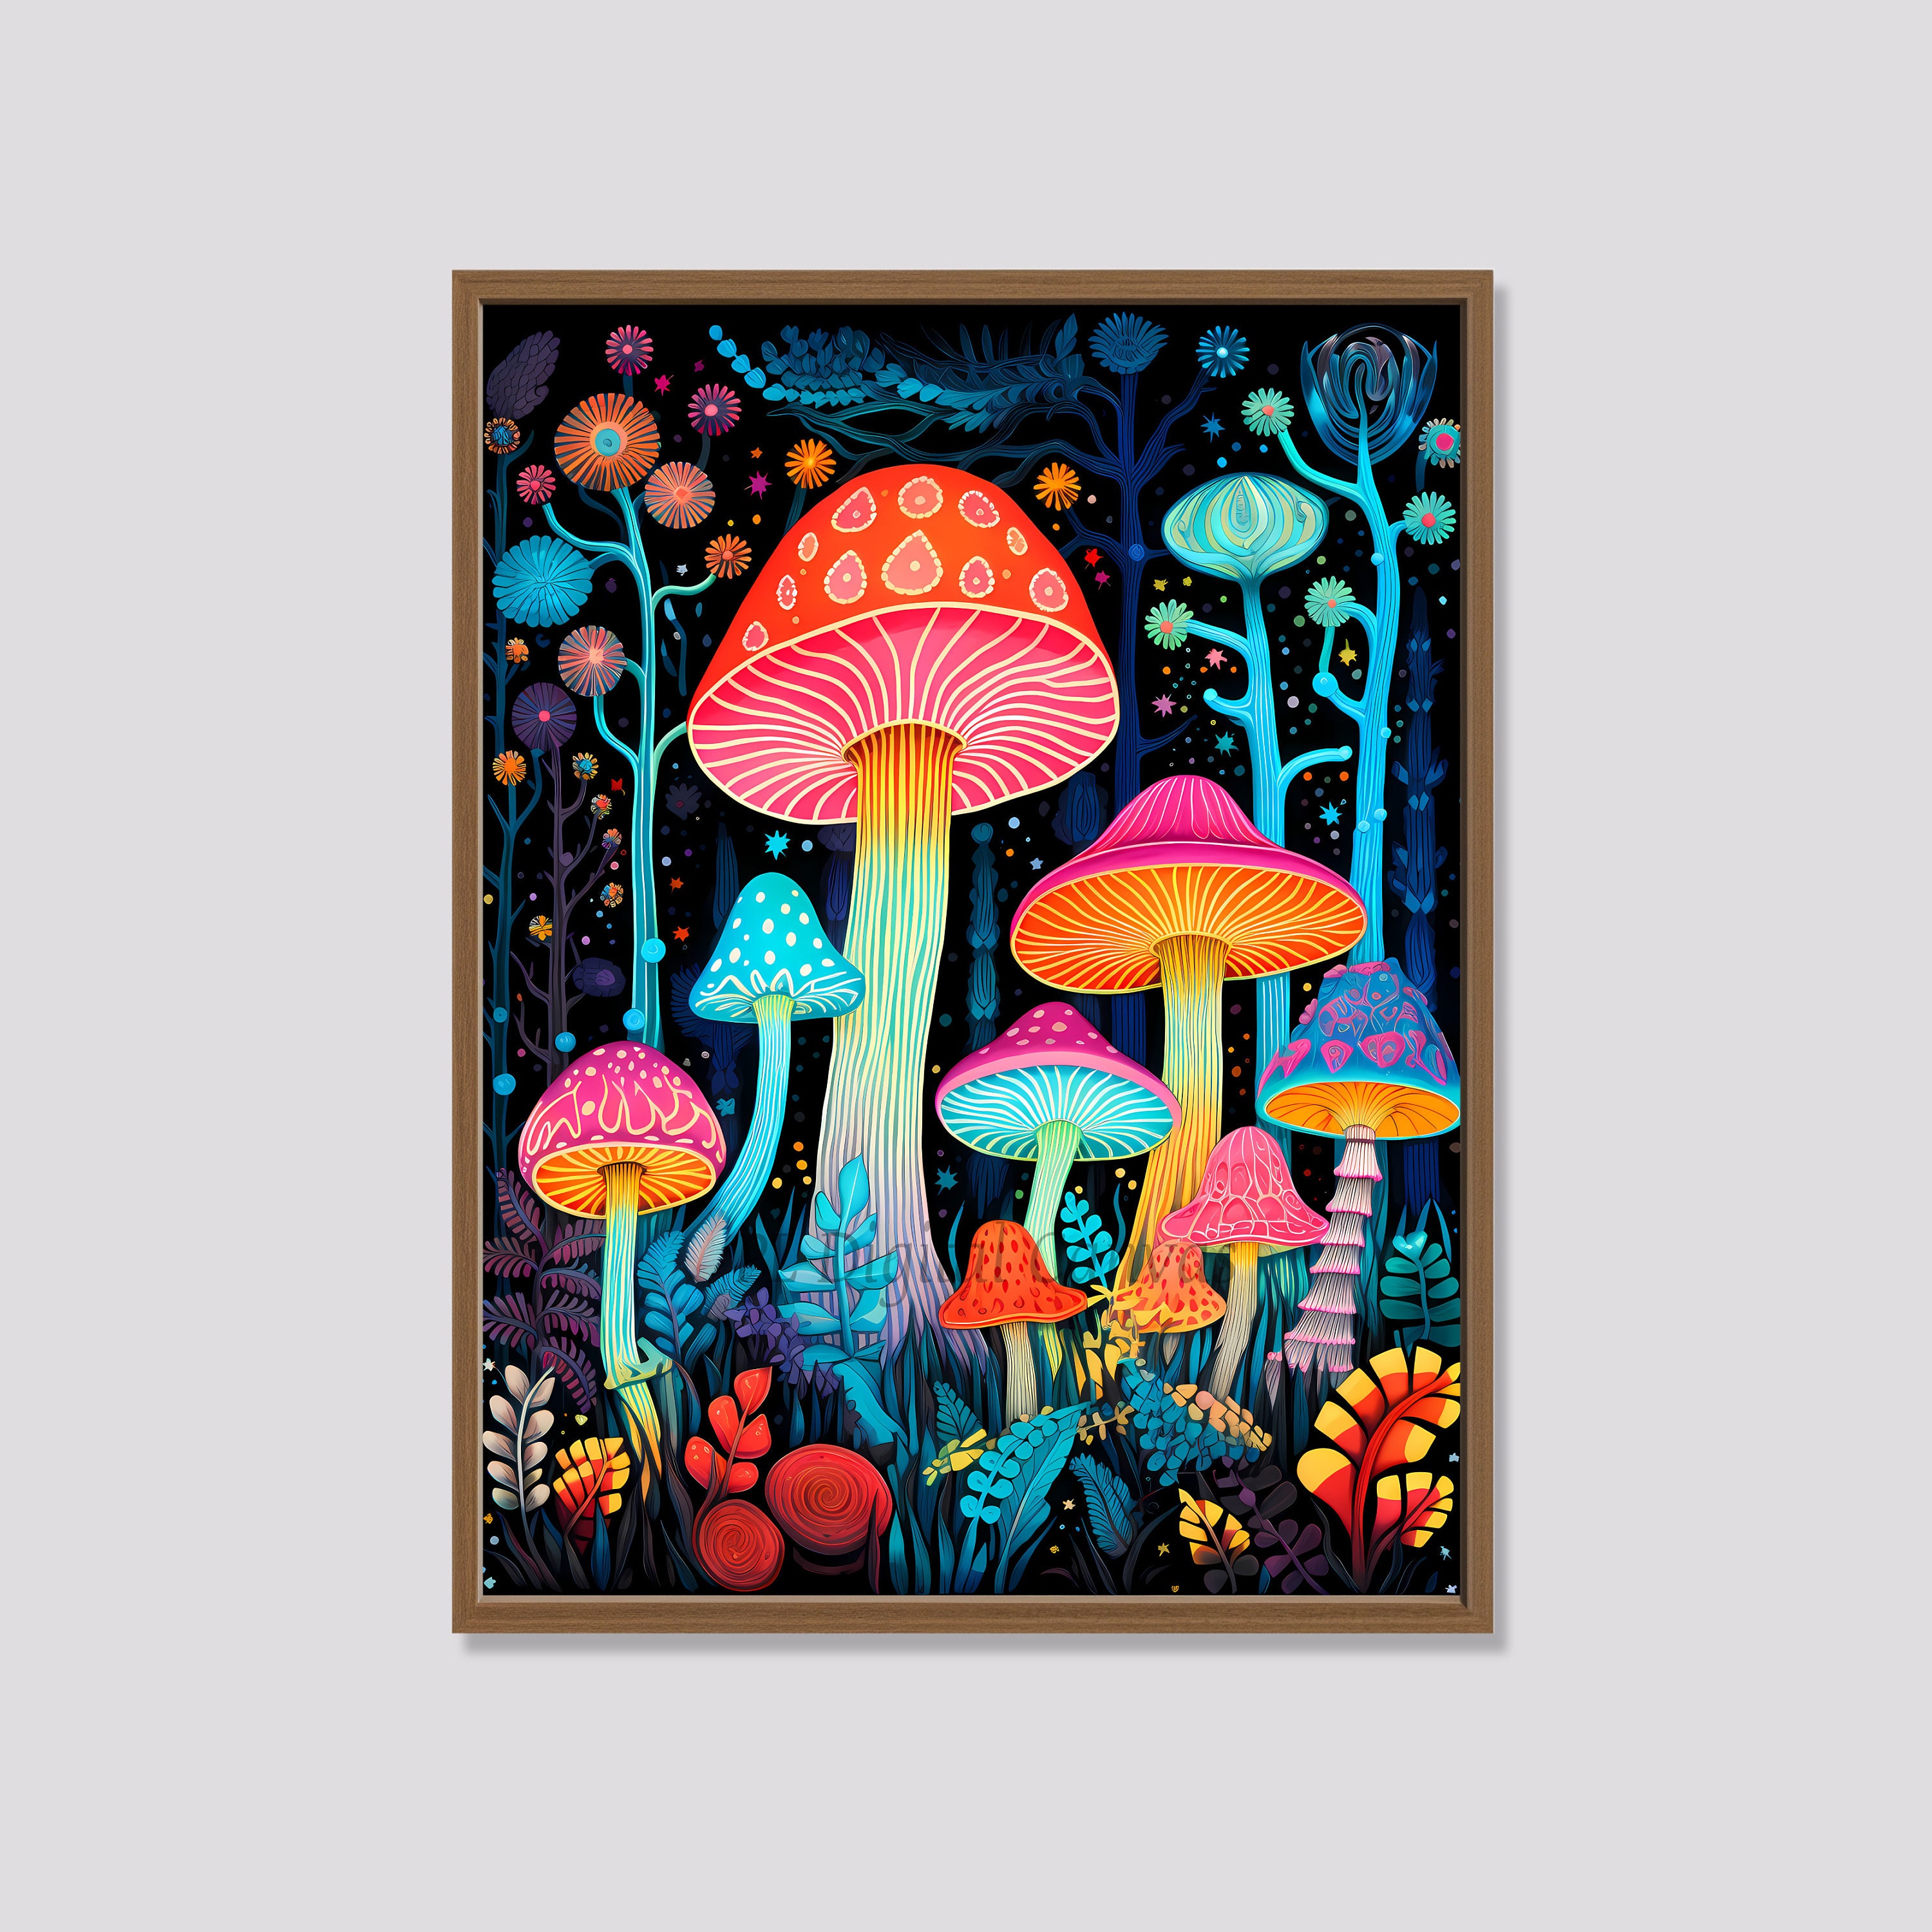 5D DIY Poured Glue Diamond Painting Kits Scalloped Edge Colorful Mushroom  House Wall Art Home Decoration Unique Gift Soft Canvas 